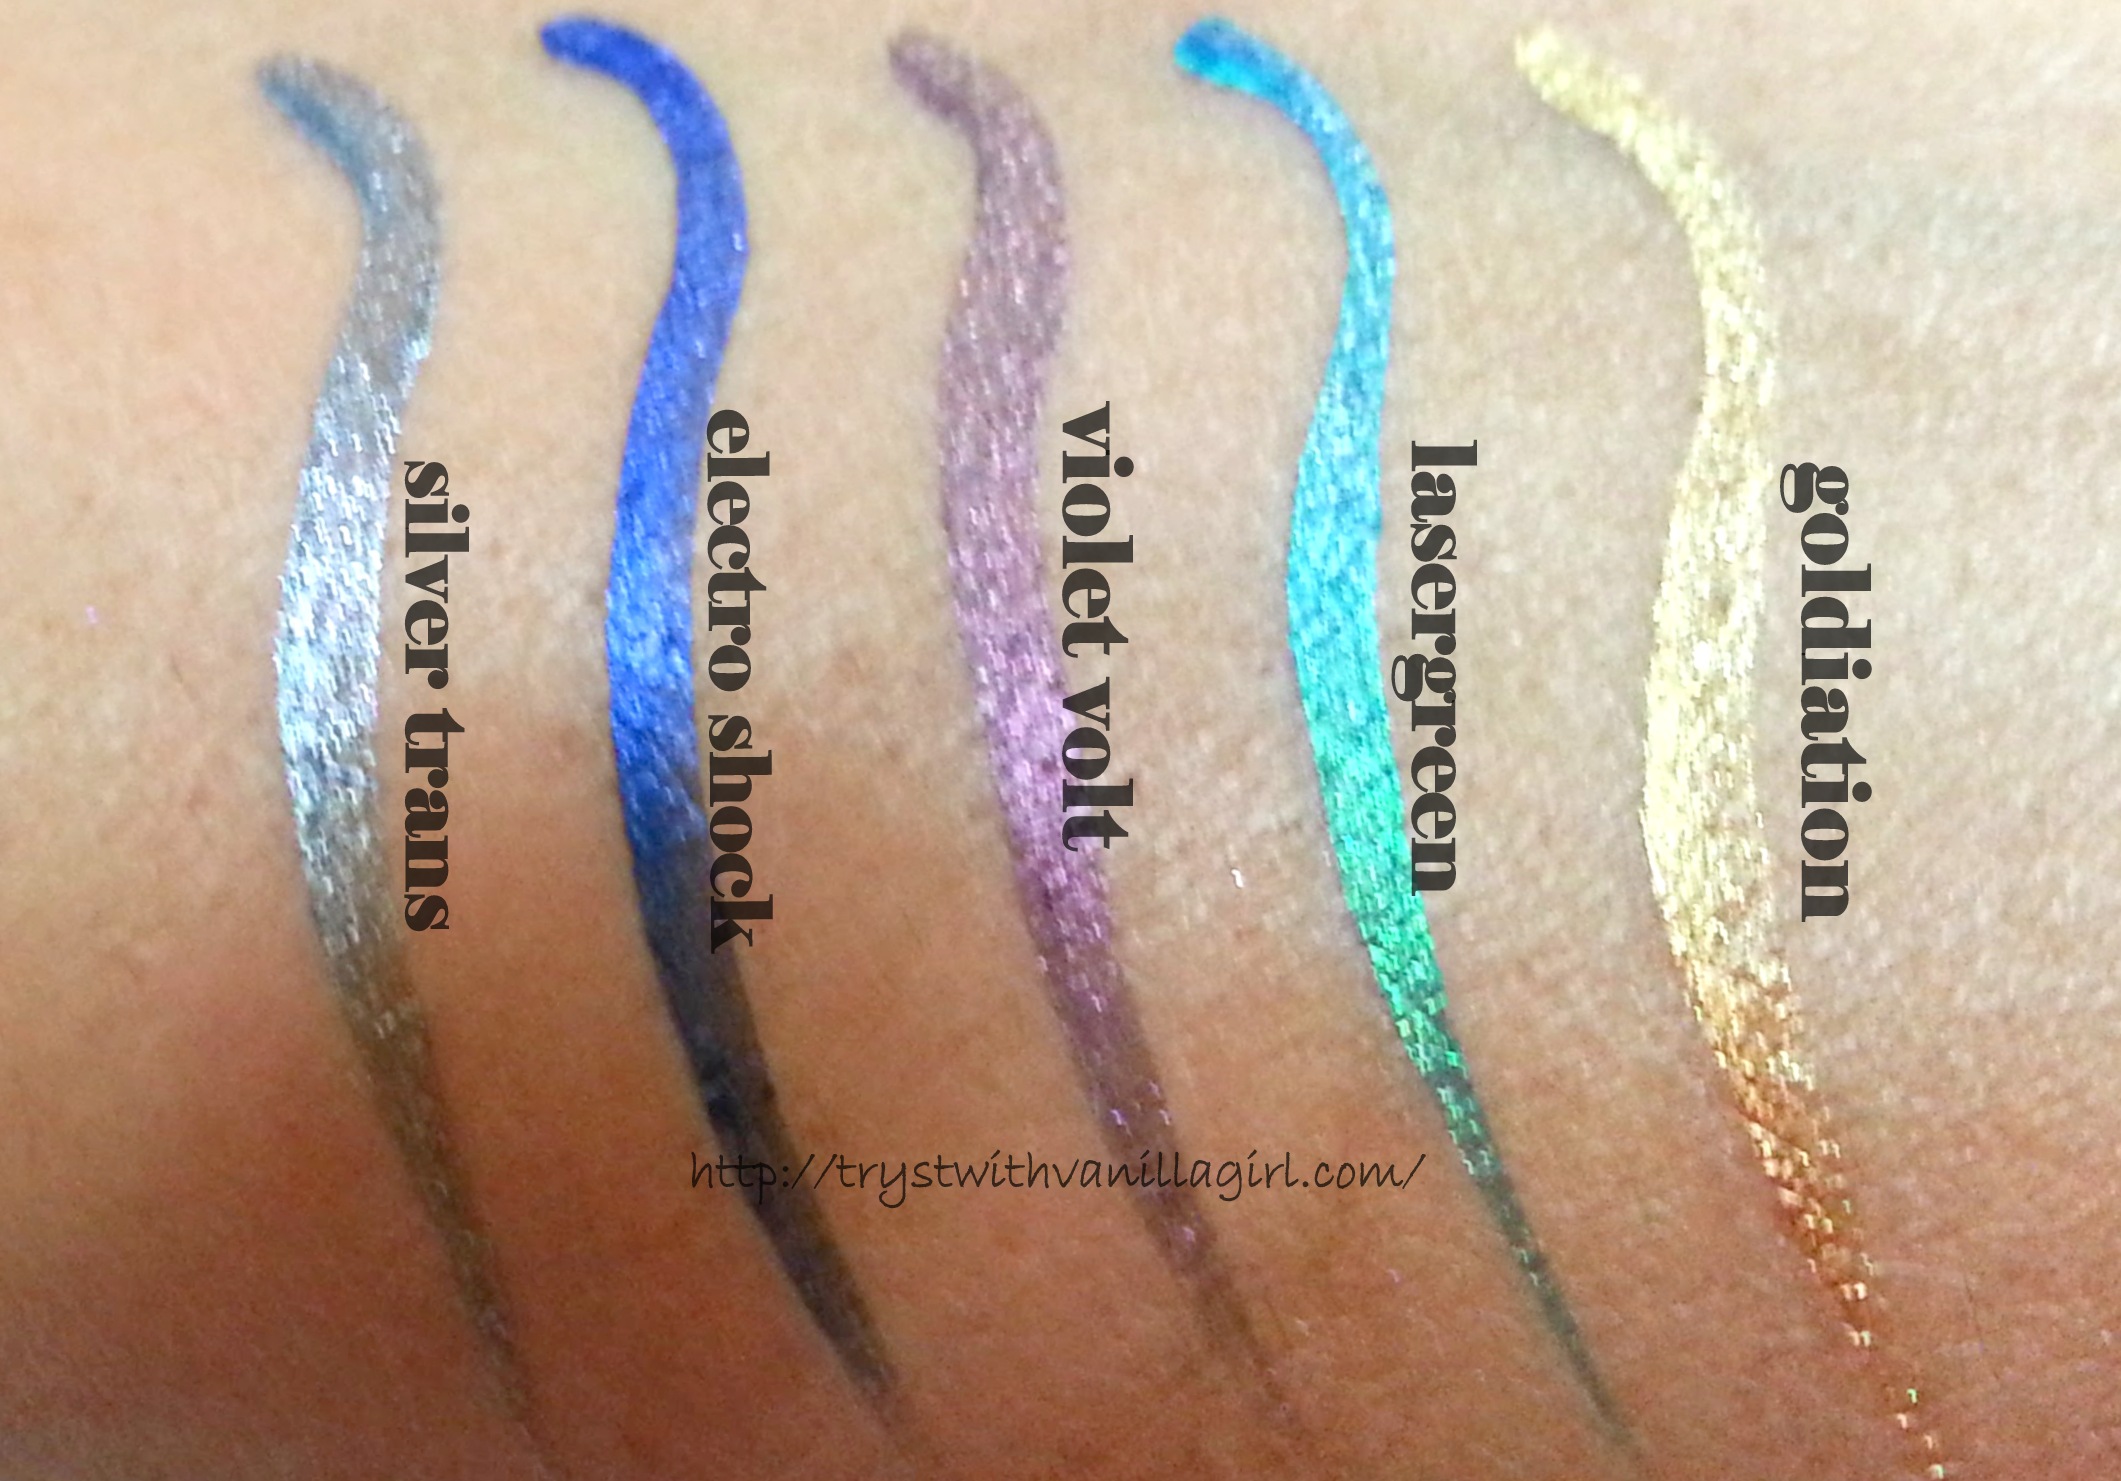 MAYBELLINE HYPERGLOSSY ELECTRICS EYELINERS SWATCHES